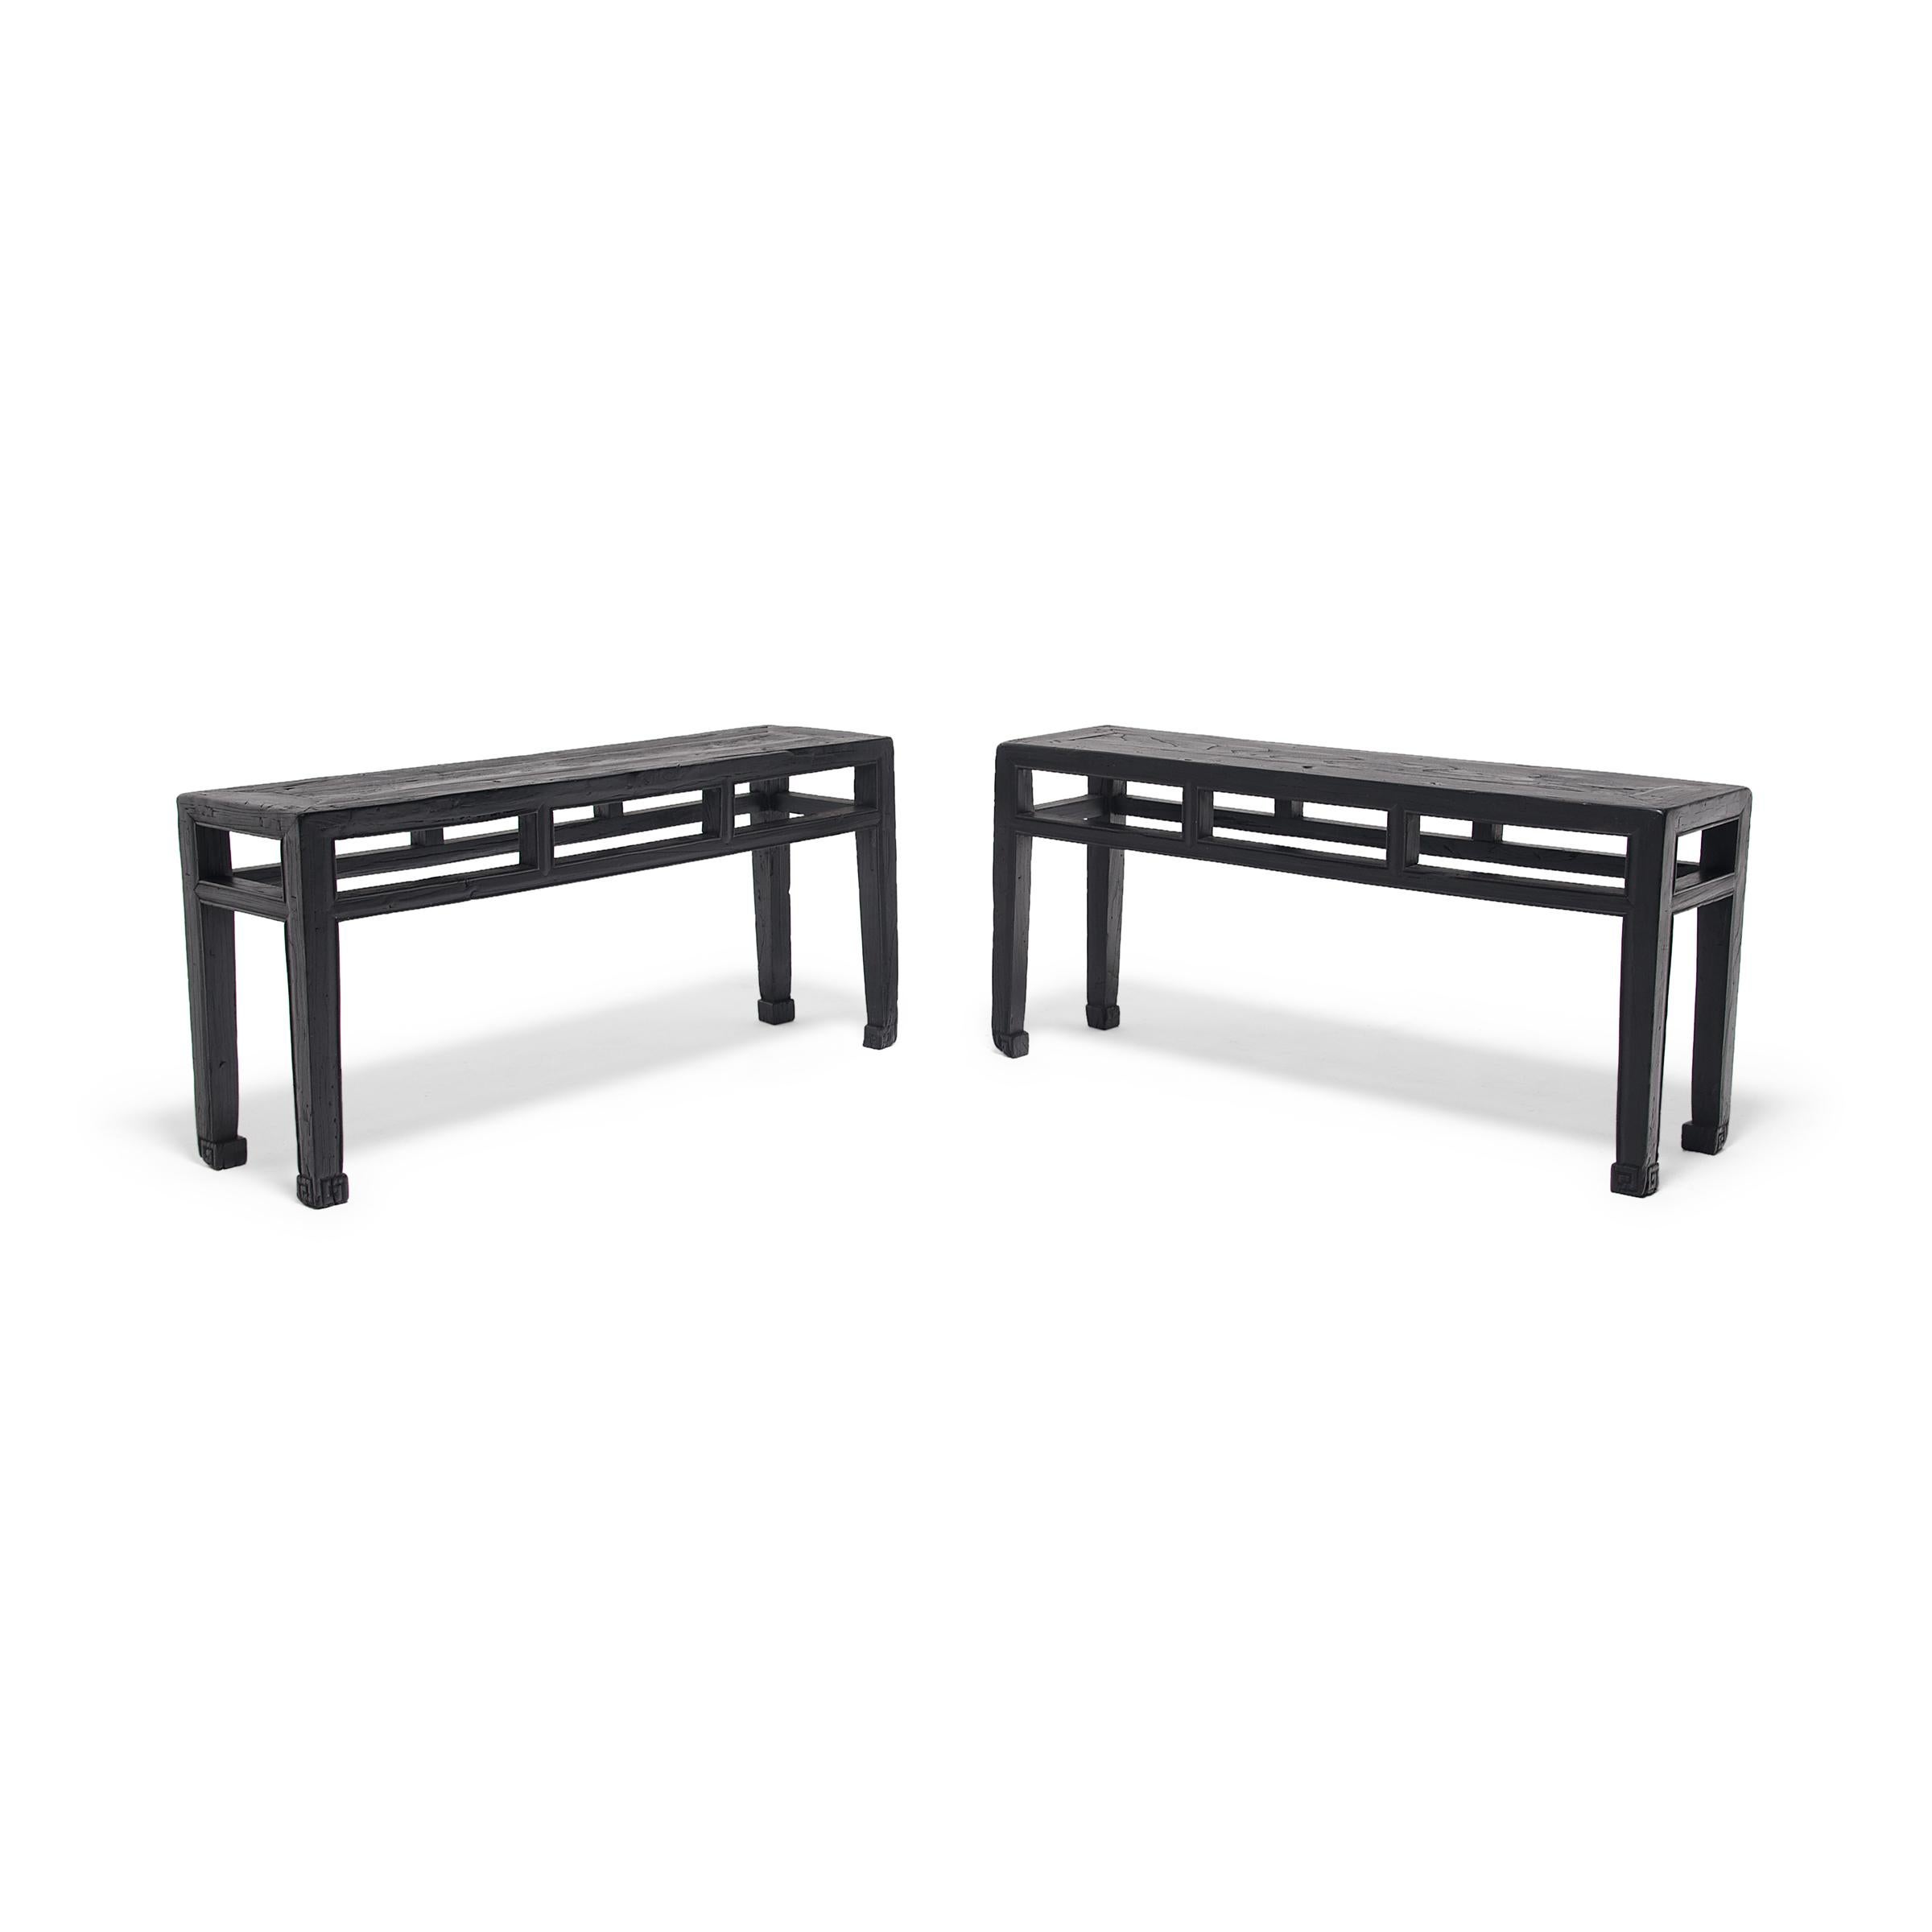 Dated to the early 20th century, these square corner benches from China's Hebei province have clean lines and balanced proportions. Each bench was constructed of mortise-and-tenon joinery with a floating panel top, straight legs, and an open,